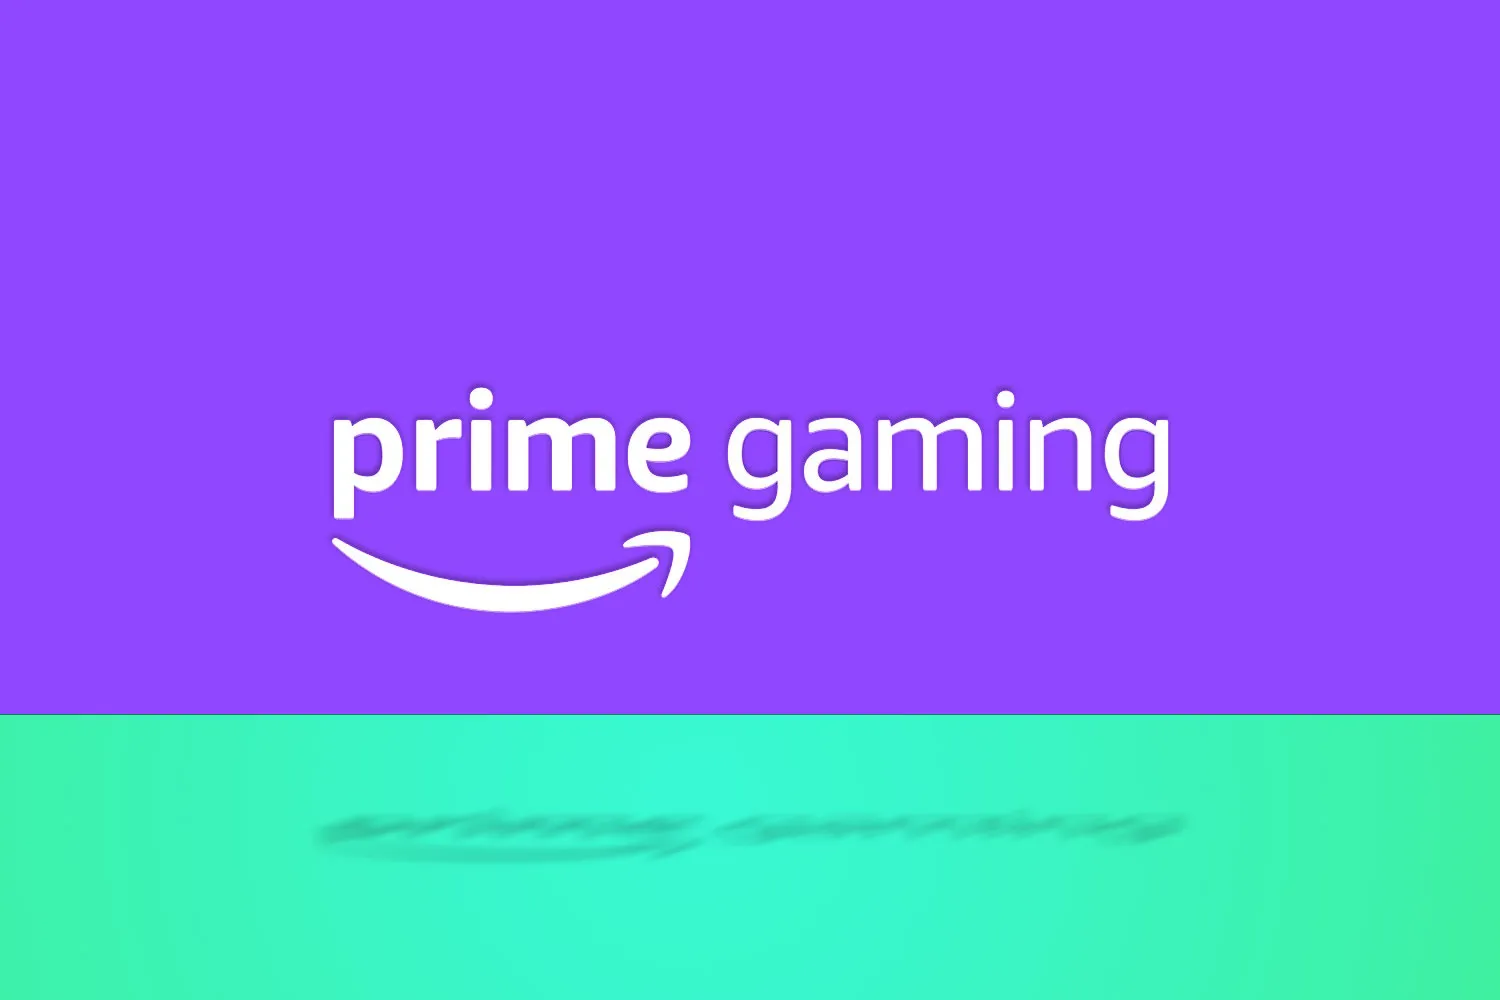 Free games with  Prime Gaming for September 2021 - Indie Game Bundles